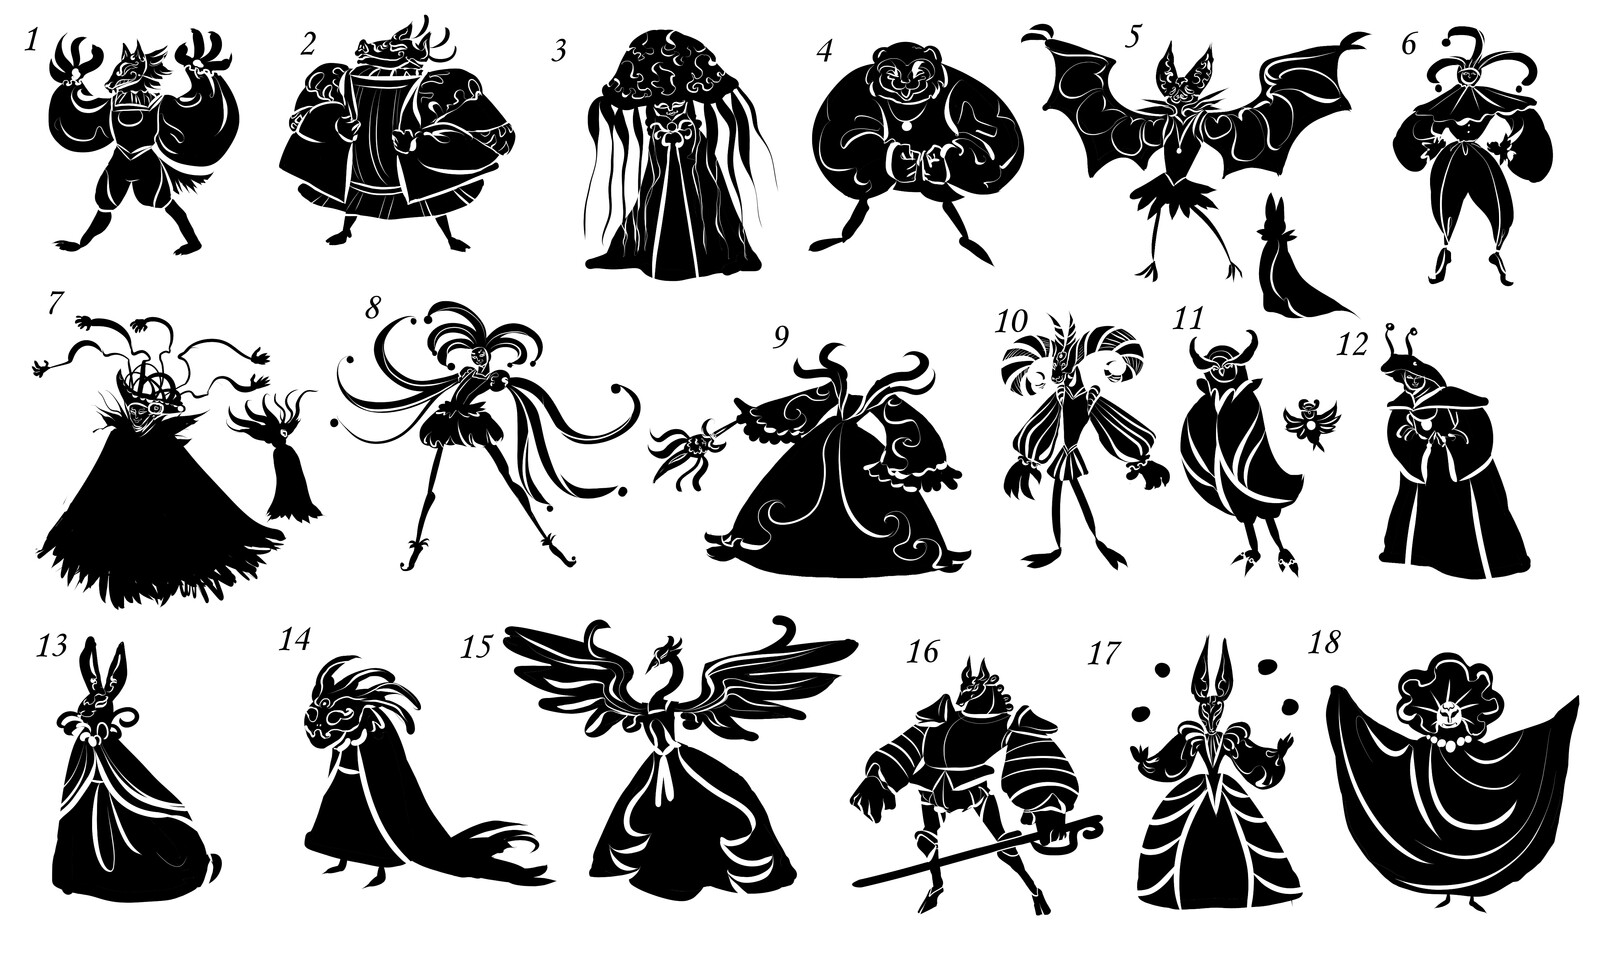 Silhouettes for many ghost ideas.